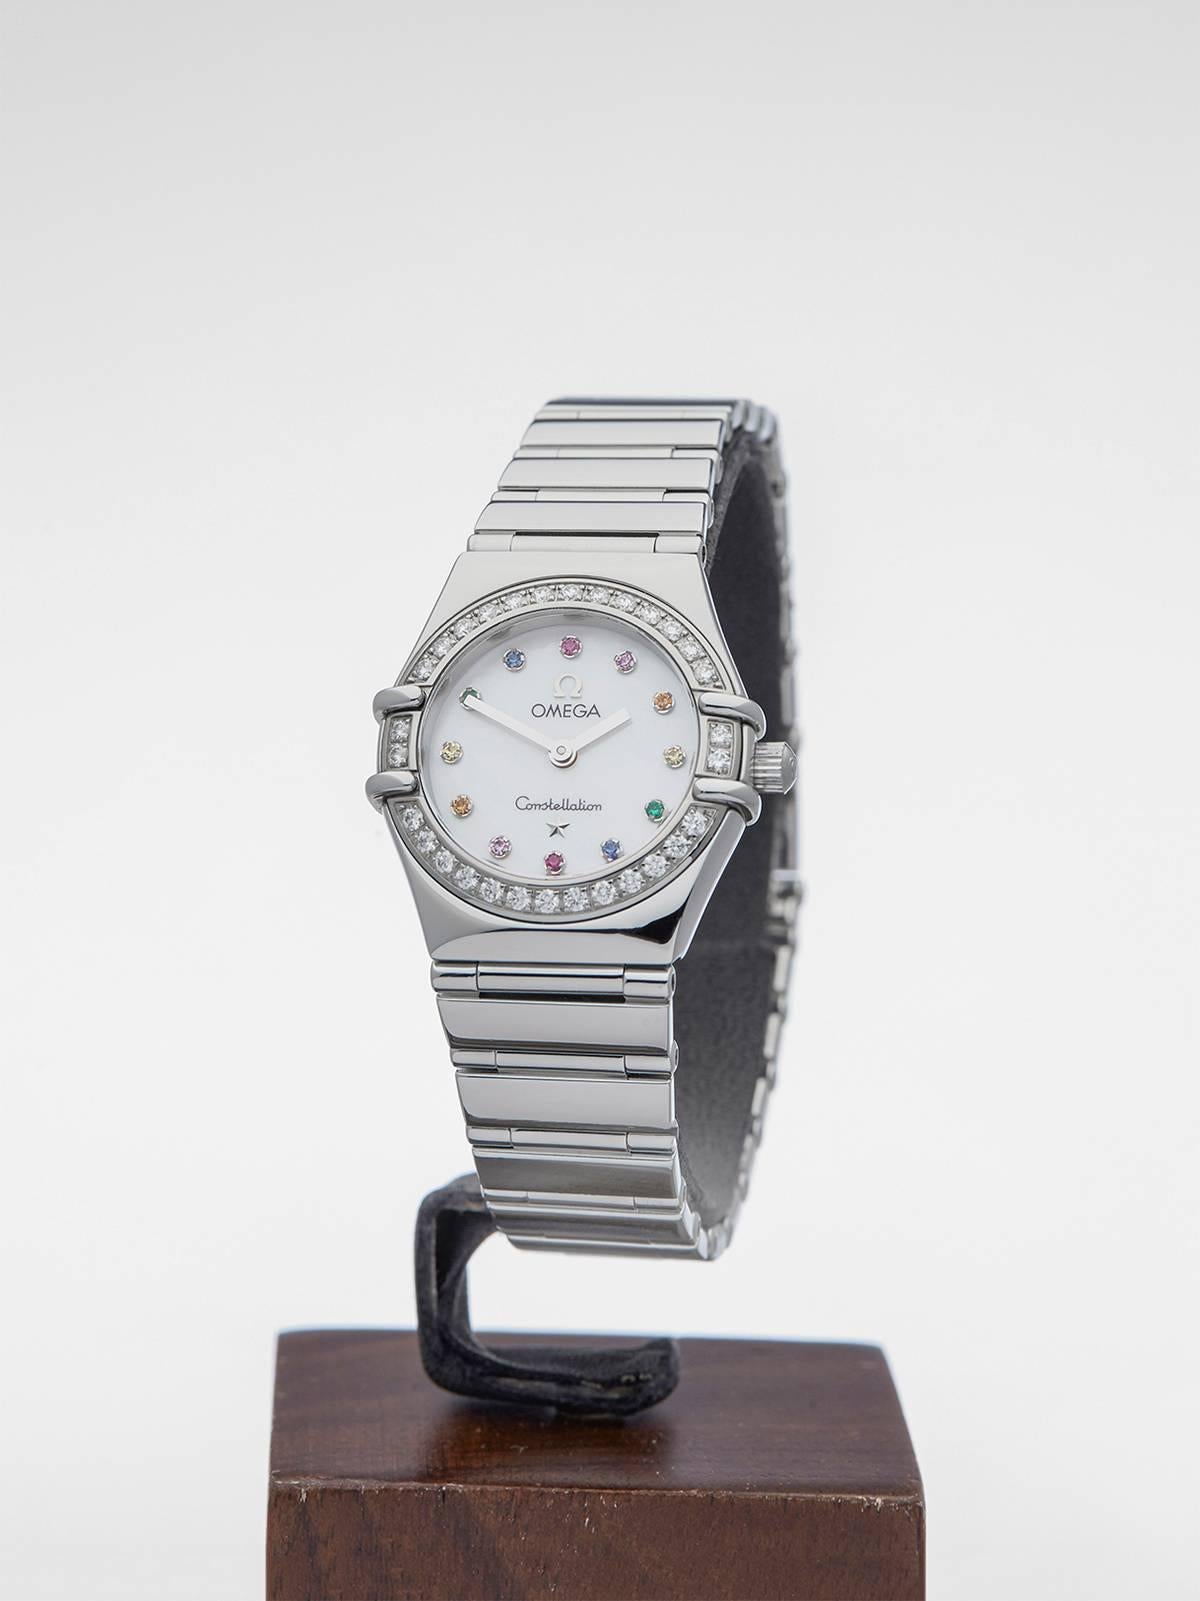 Ref: COM808
Model: 1465.79.00
Serial: 901*****
Condition: 9 - Excellent condition
Age: 2010's
Case Diameter: 22 mm
Case Size: 22mm
Box and Papers: Box Only
Movement: Quartz
Case: Stainless Steel
Dial: Mother of Pearl
Bracelet: Stainless Steel
Strap